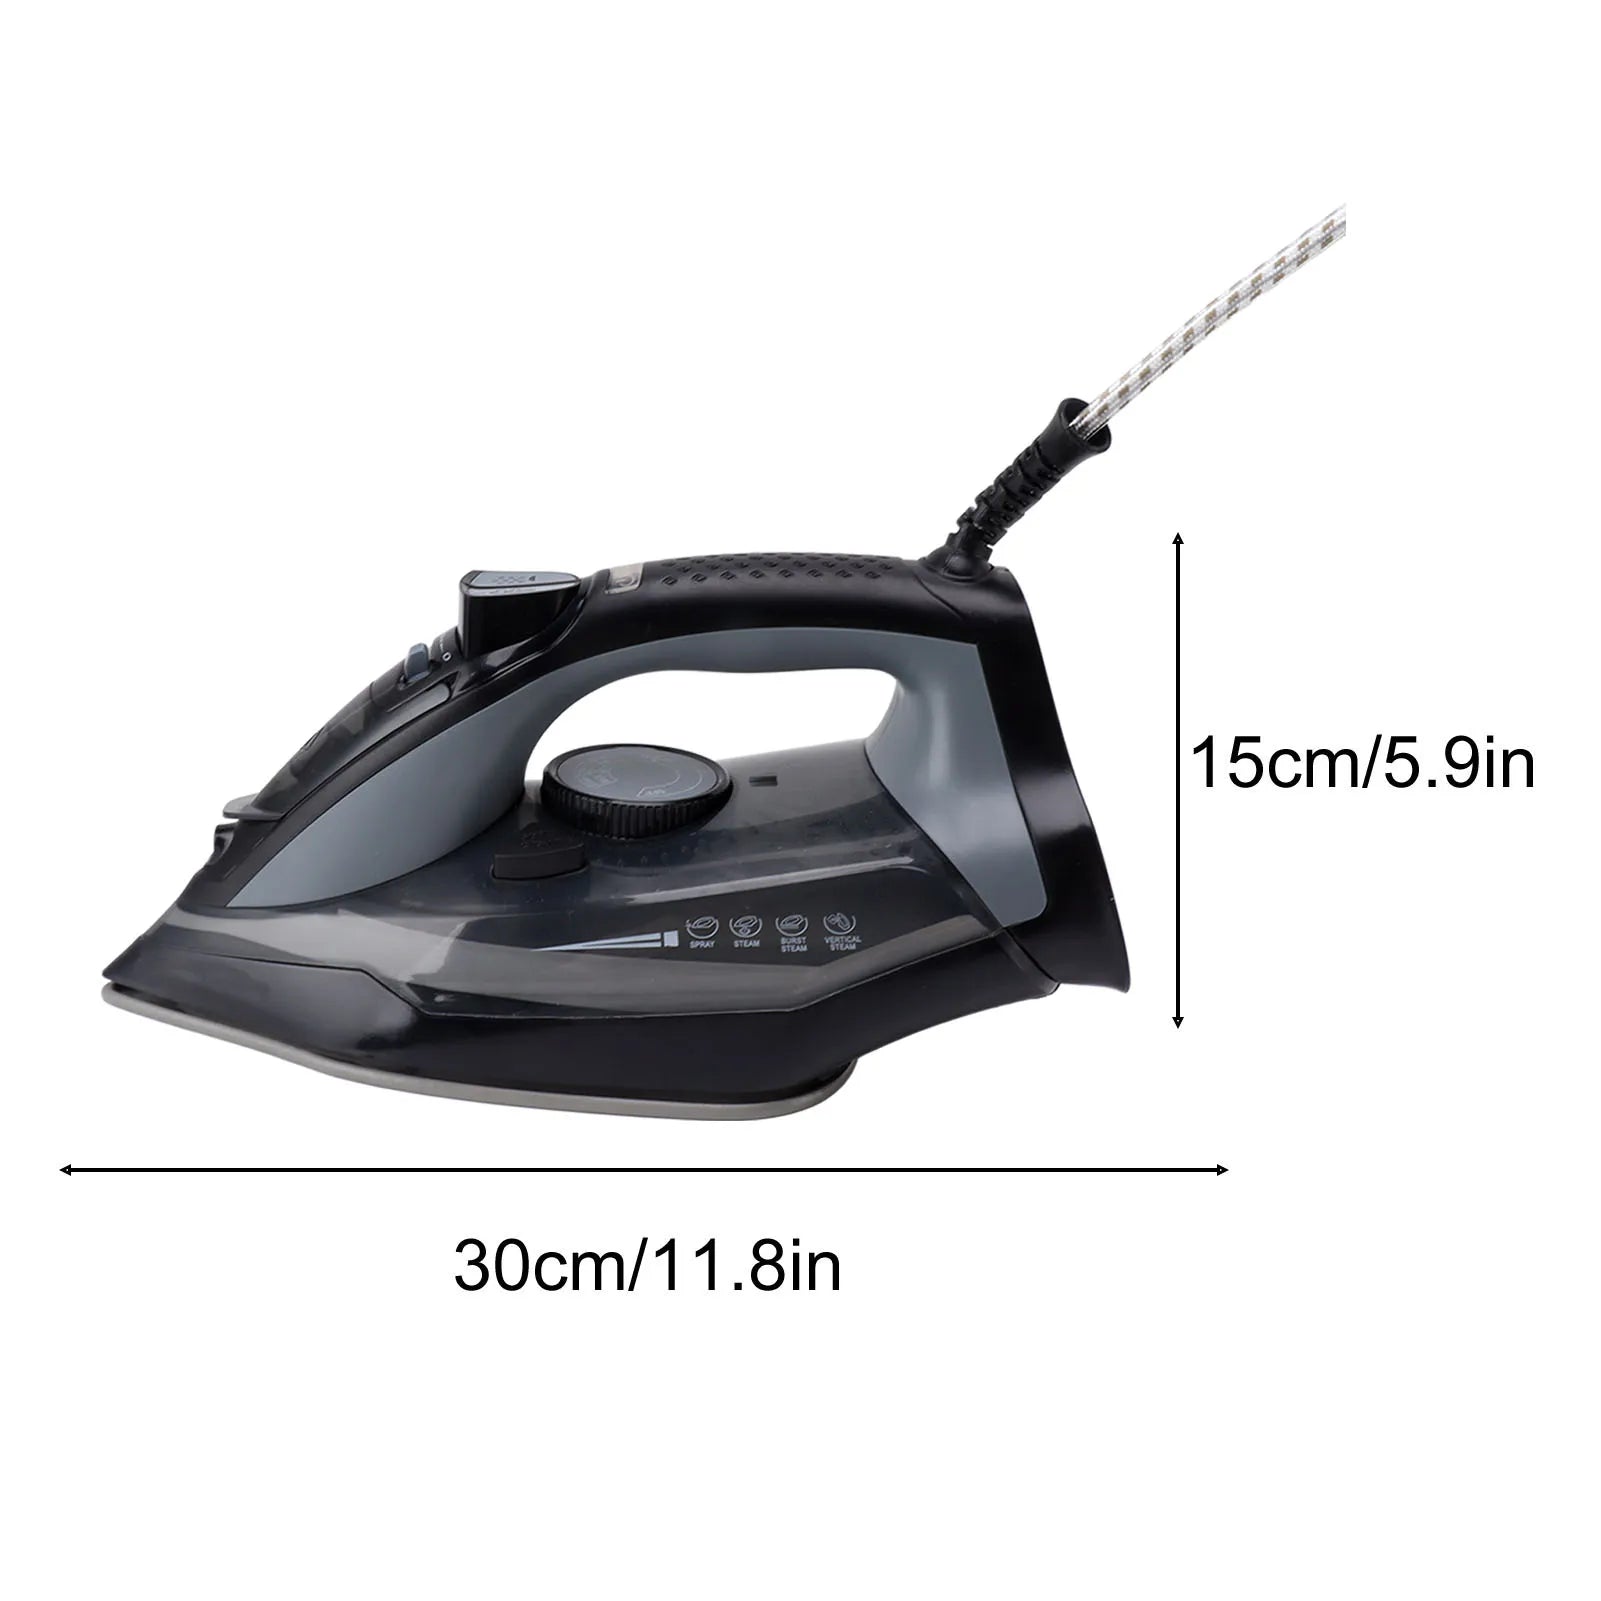 2400W Electric Iron Home Steam Iron UK 220V